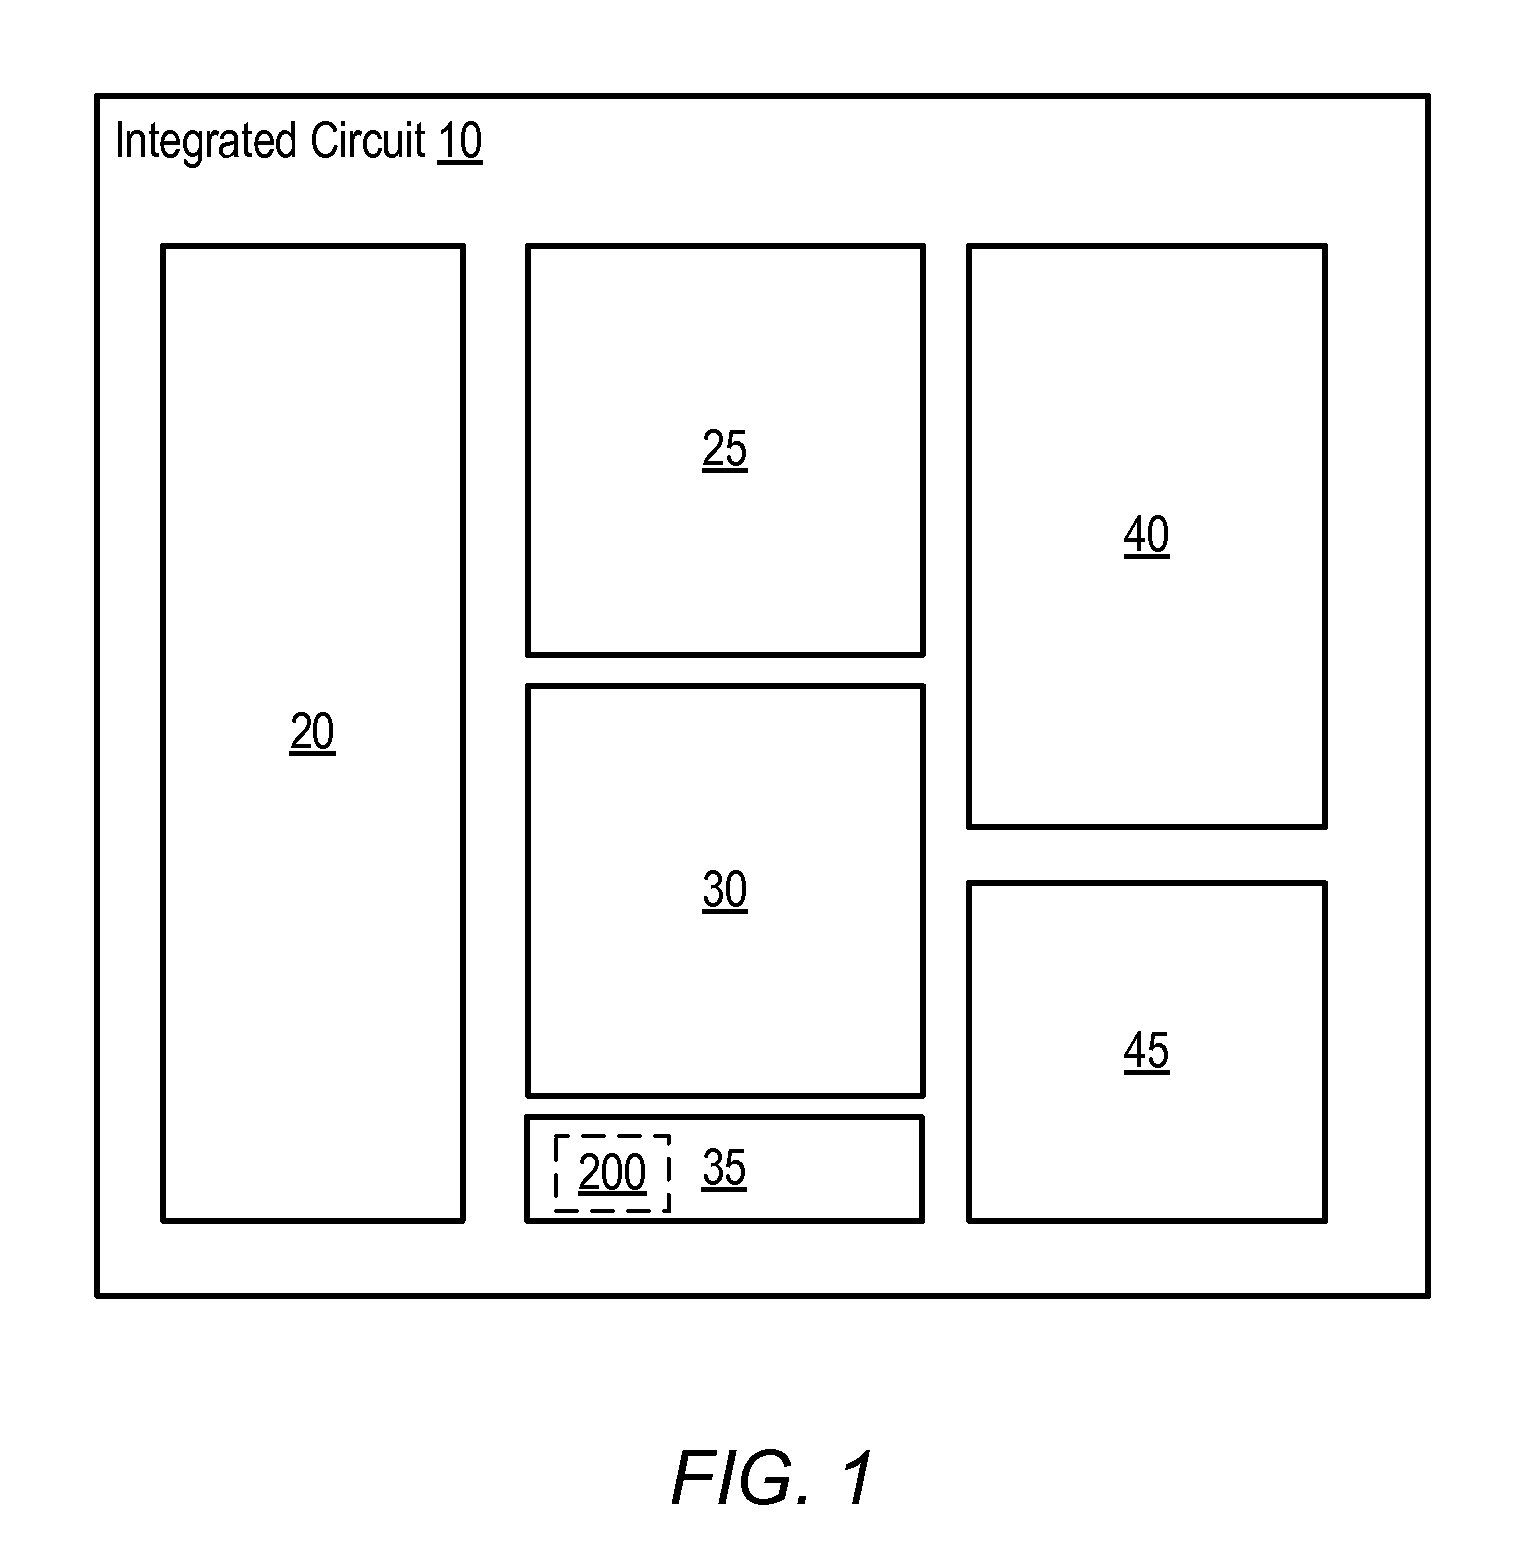 Method for identifying redundant signal paths for self-gating signals